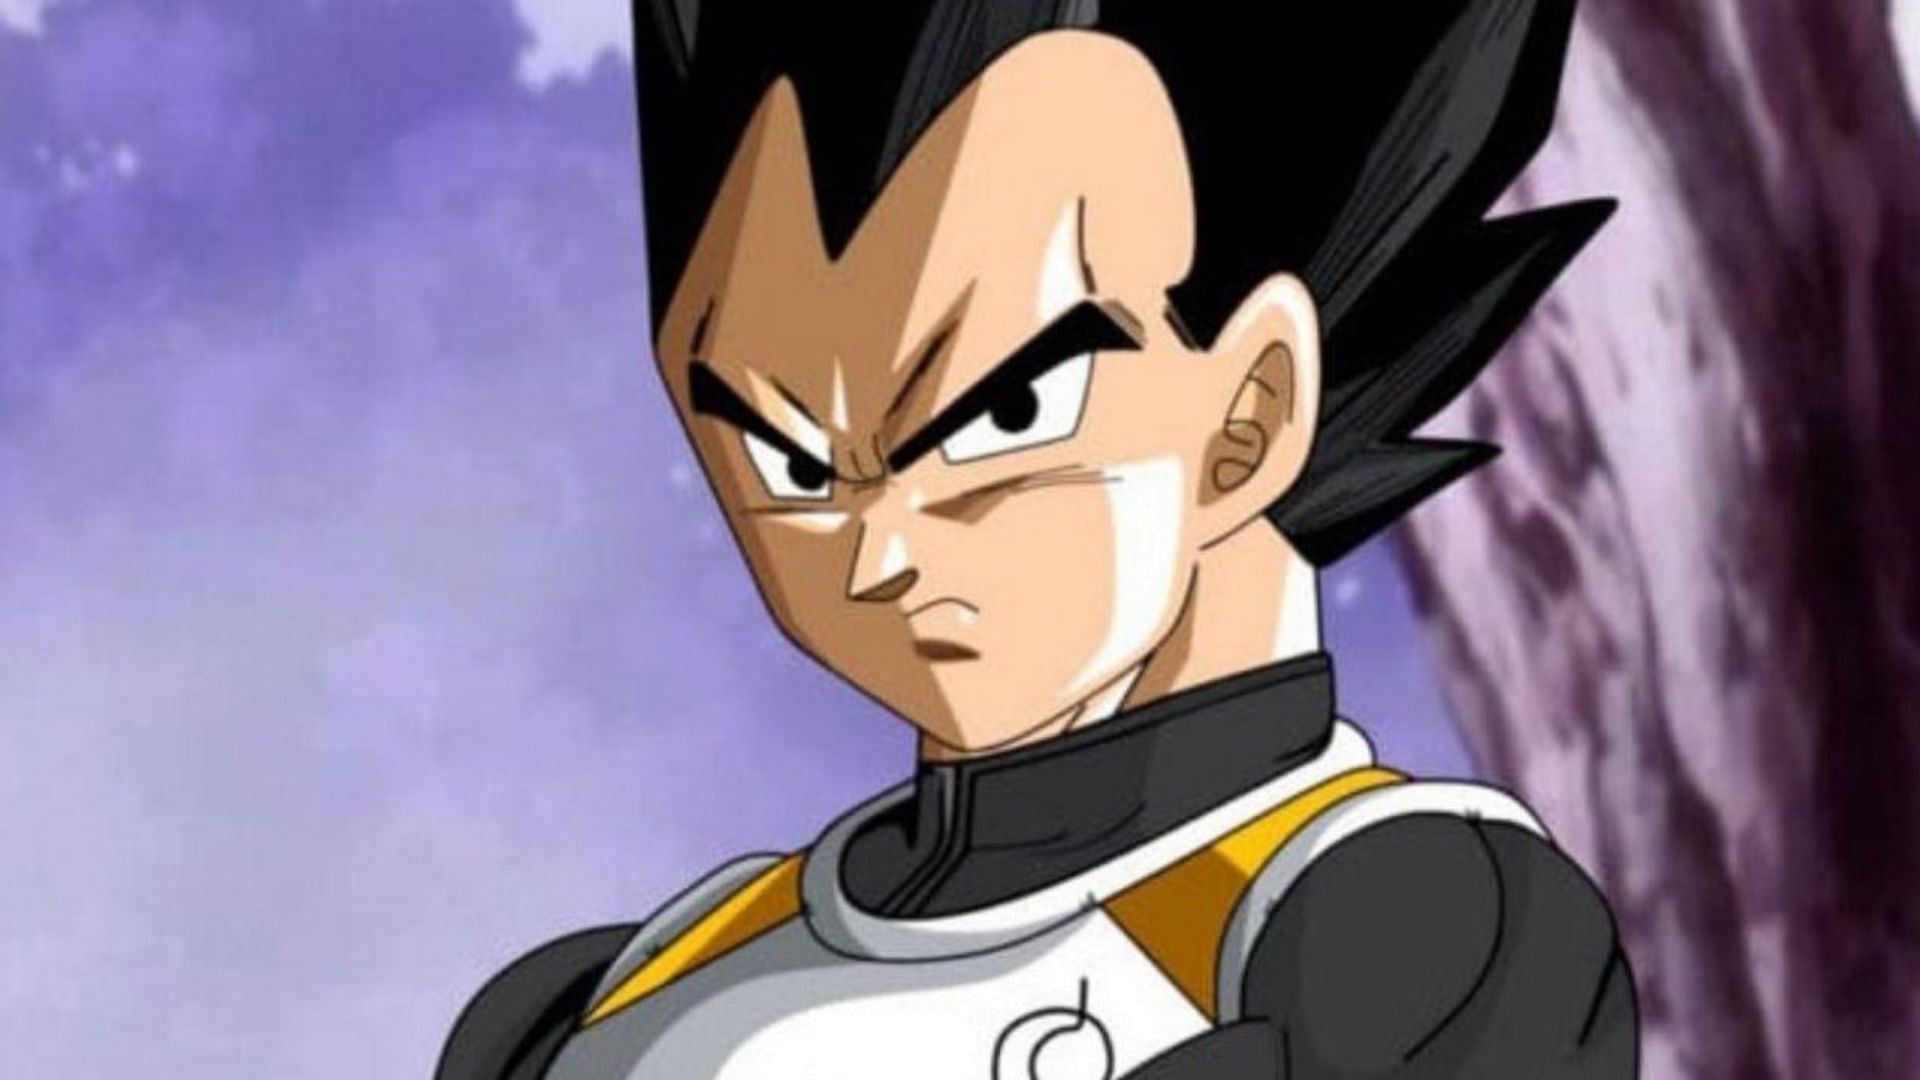 8 coolest anime characters with spiky hair